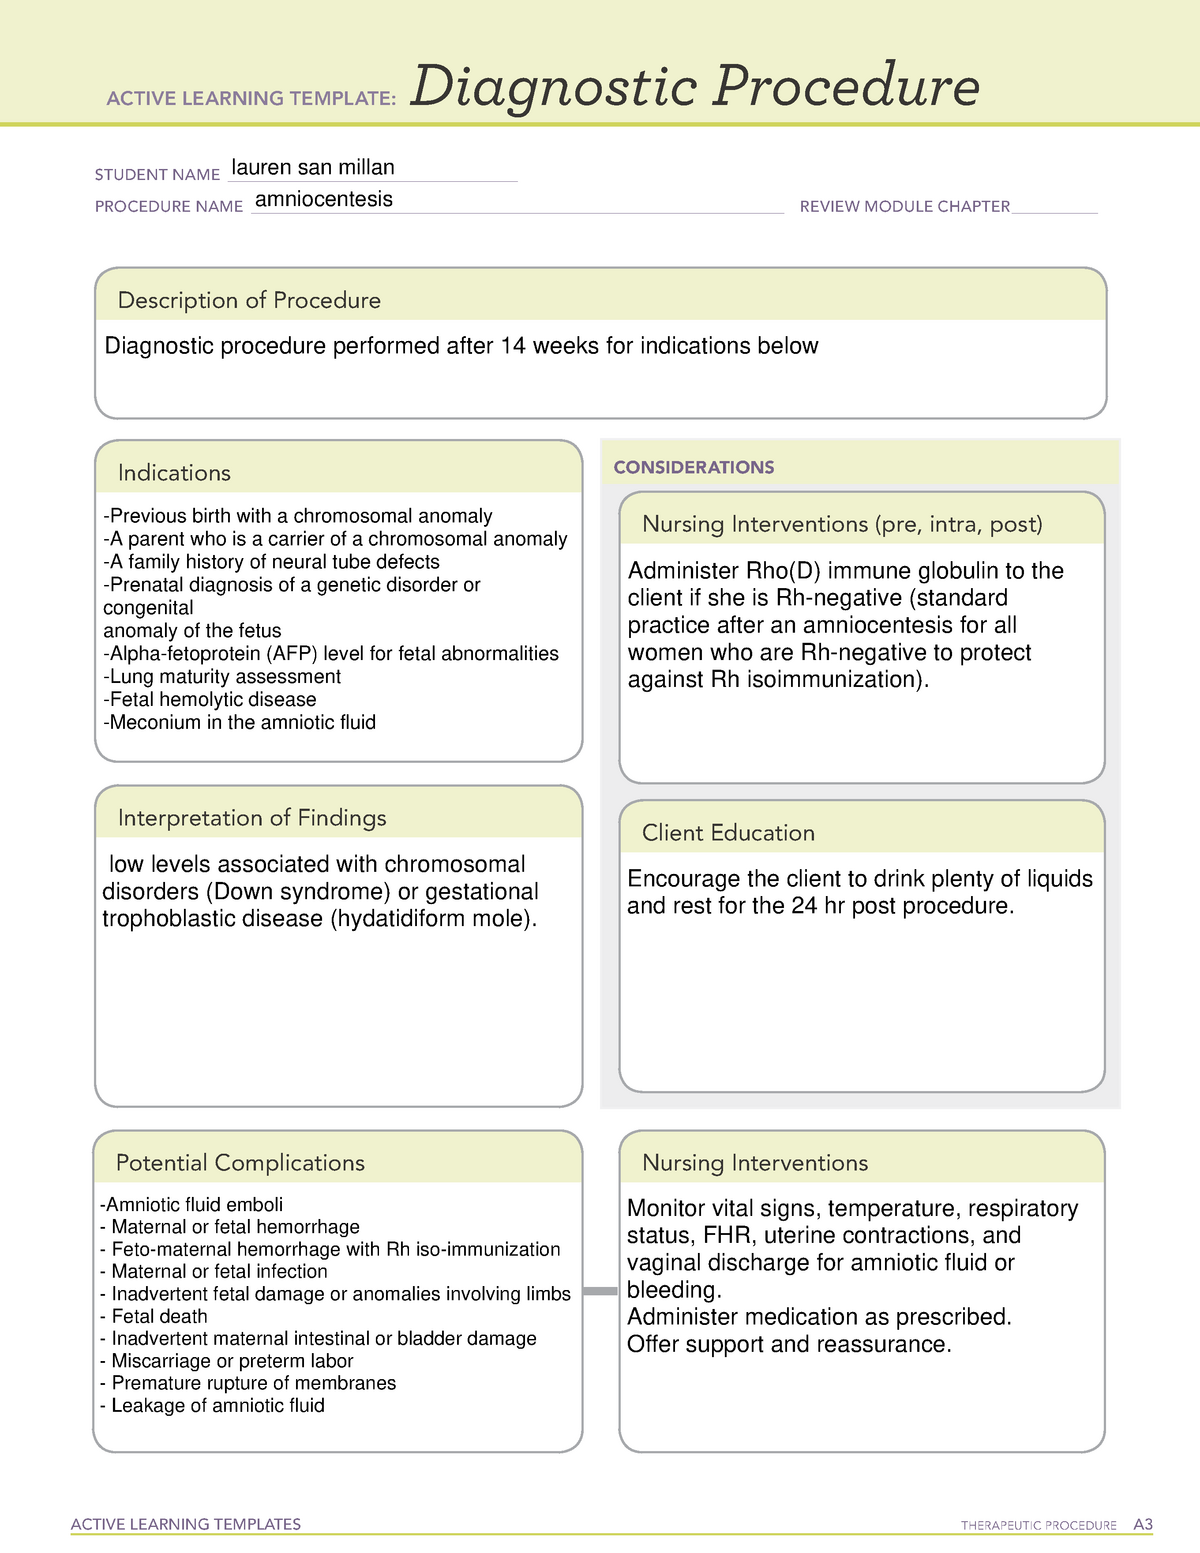 Amniocentesis Active learning templates ACTIVE LEARNING TEMPLATES